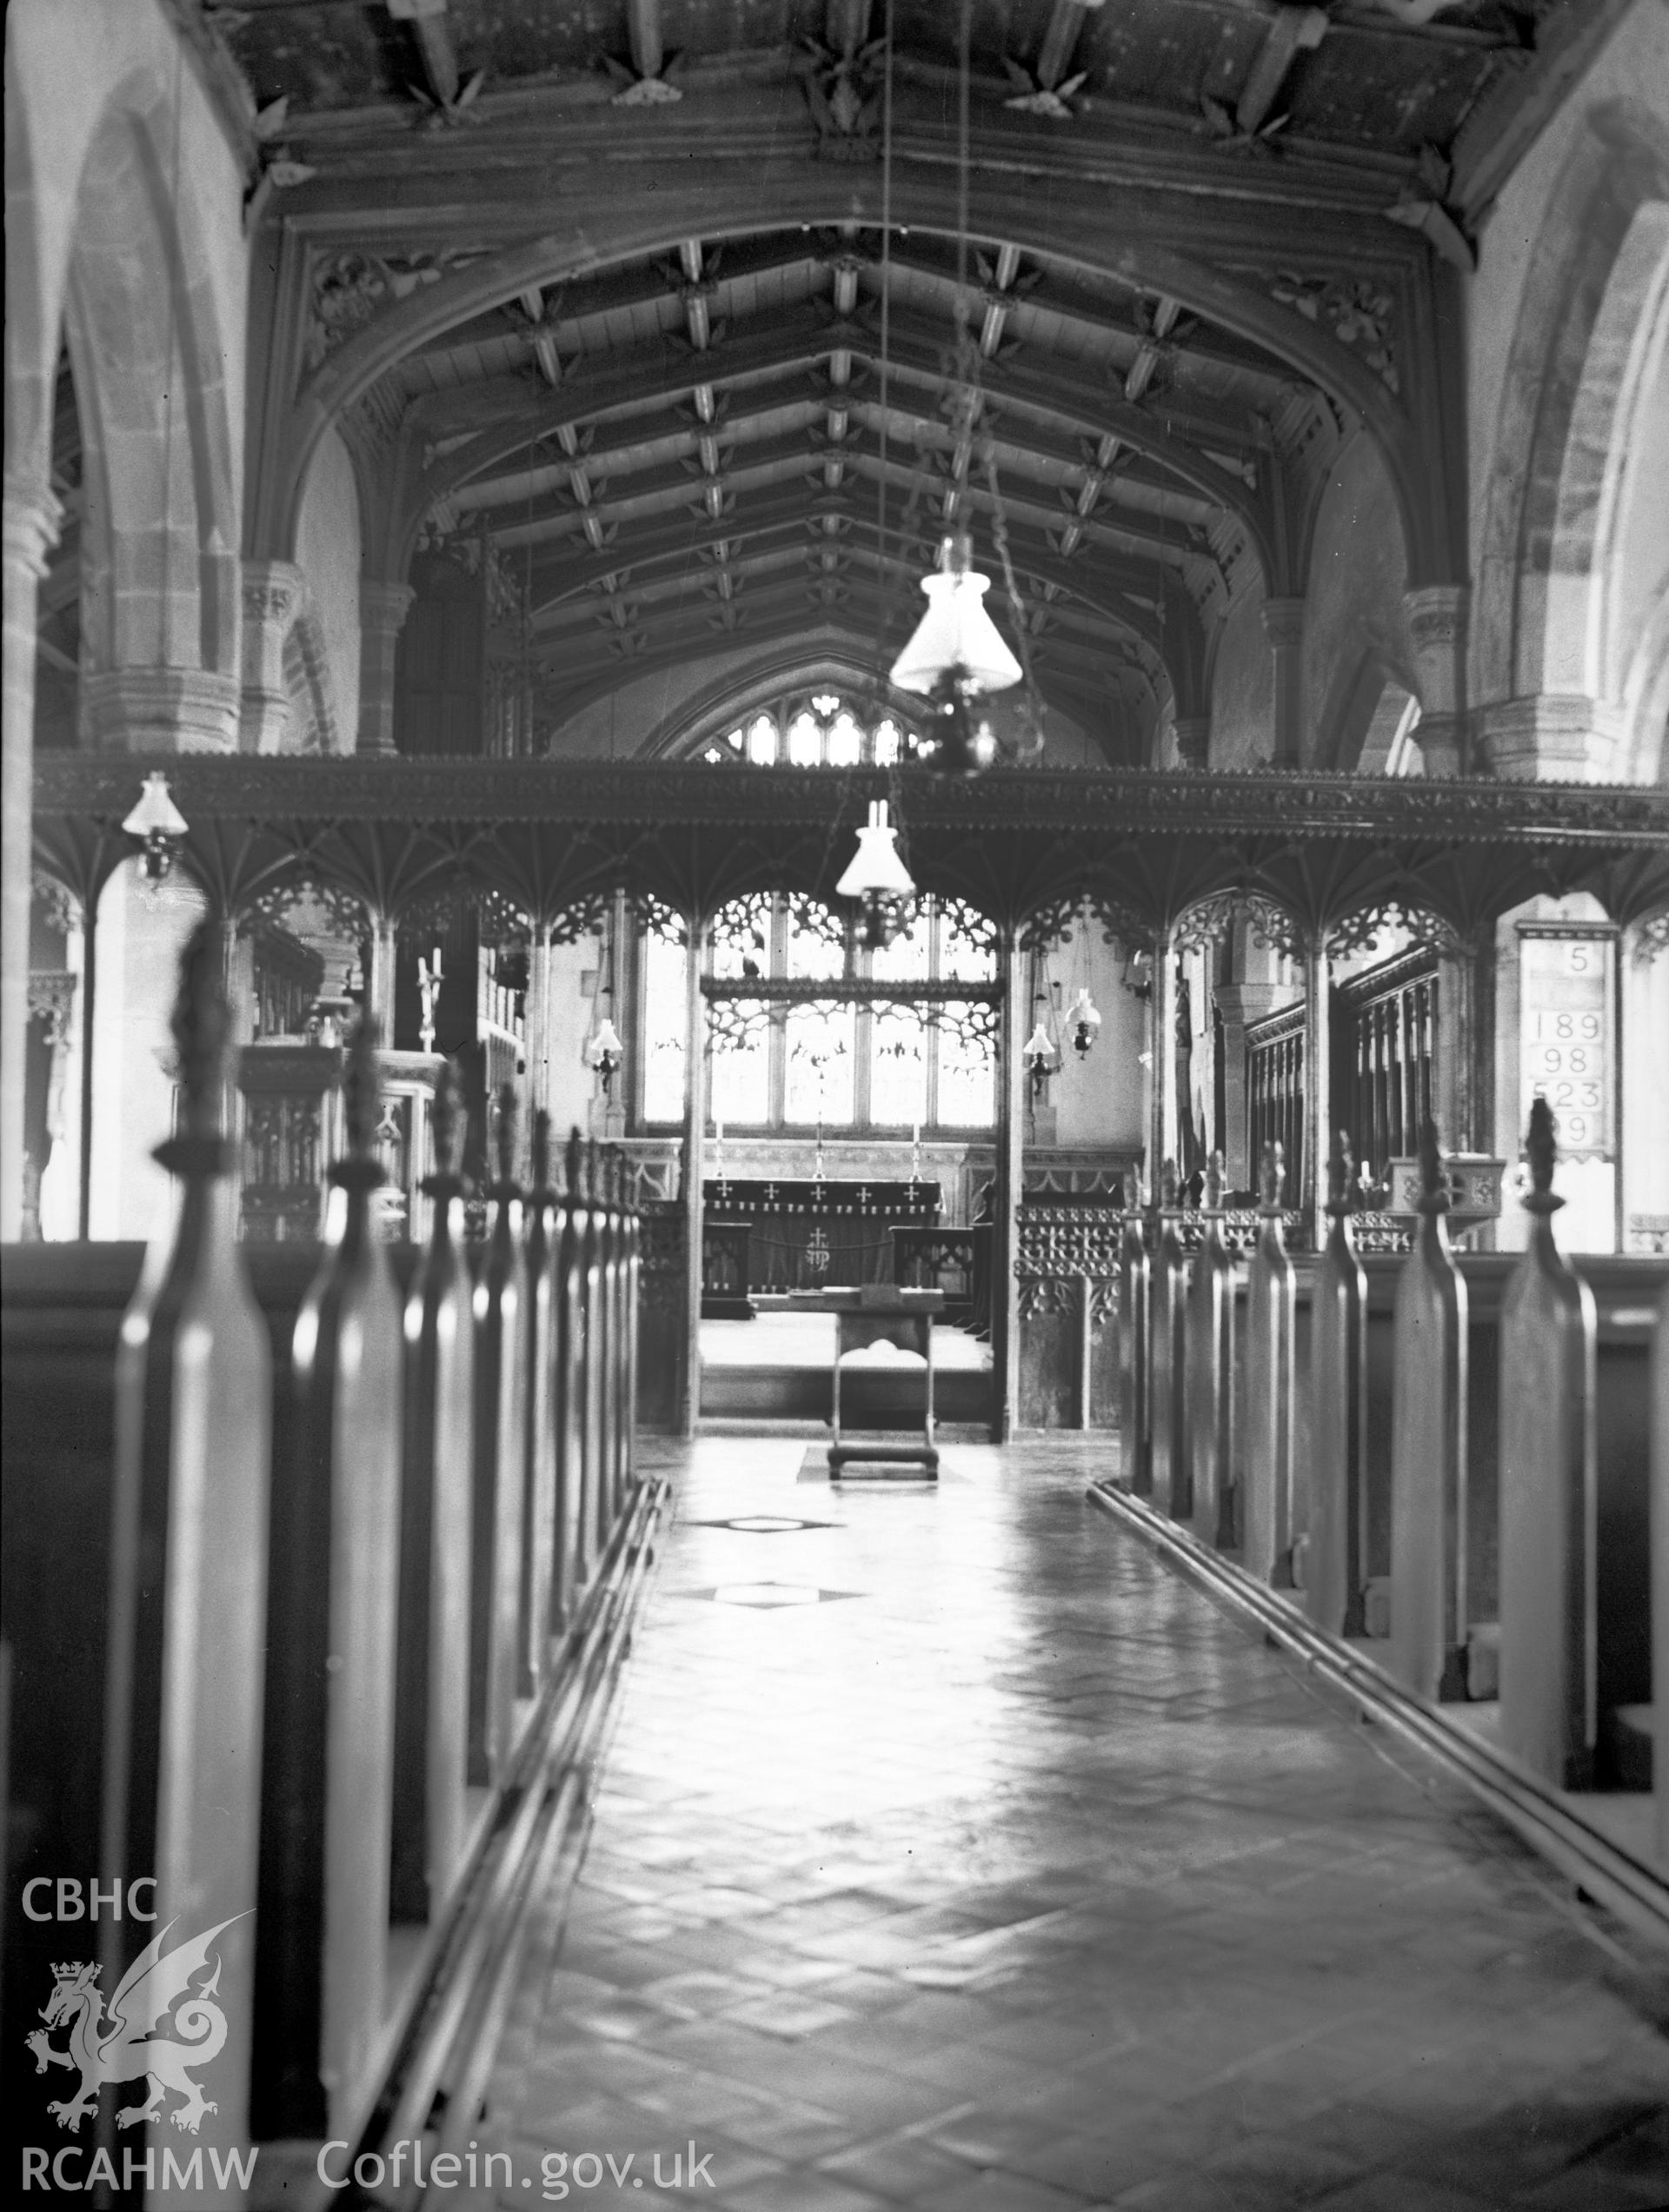 Digital copy of a nitrate negative showing view of interior, nave and screen from west, St Stephen's Church, Old Radnor. From the National Building Record Postcard Collection.